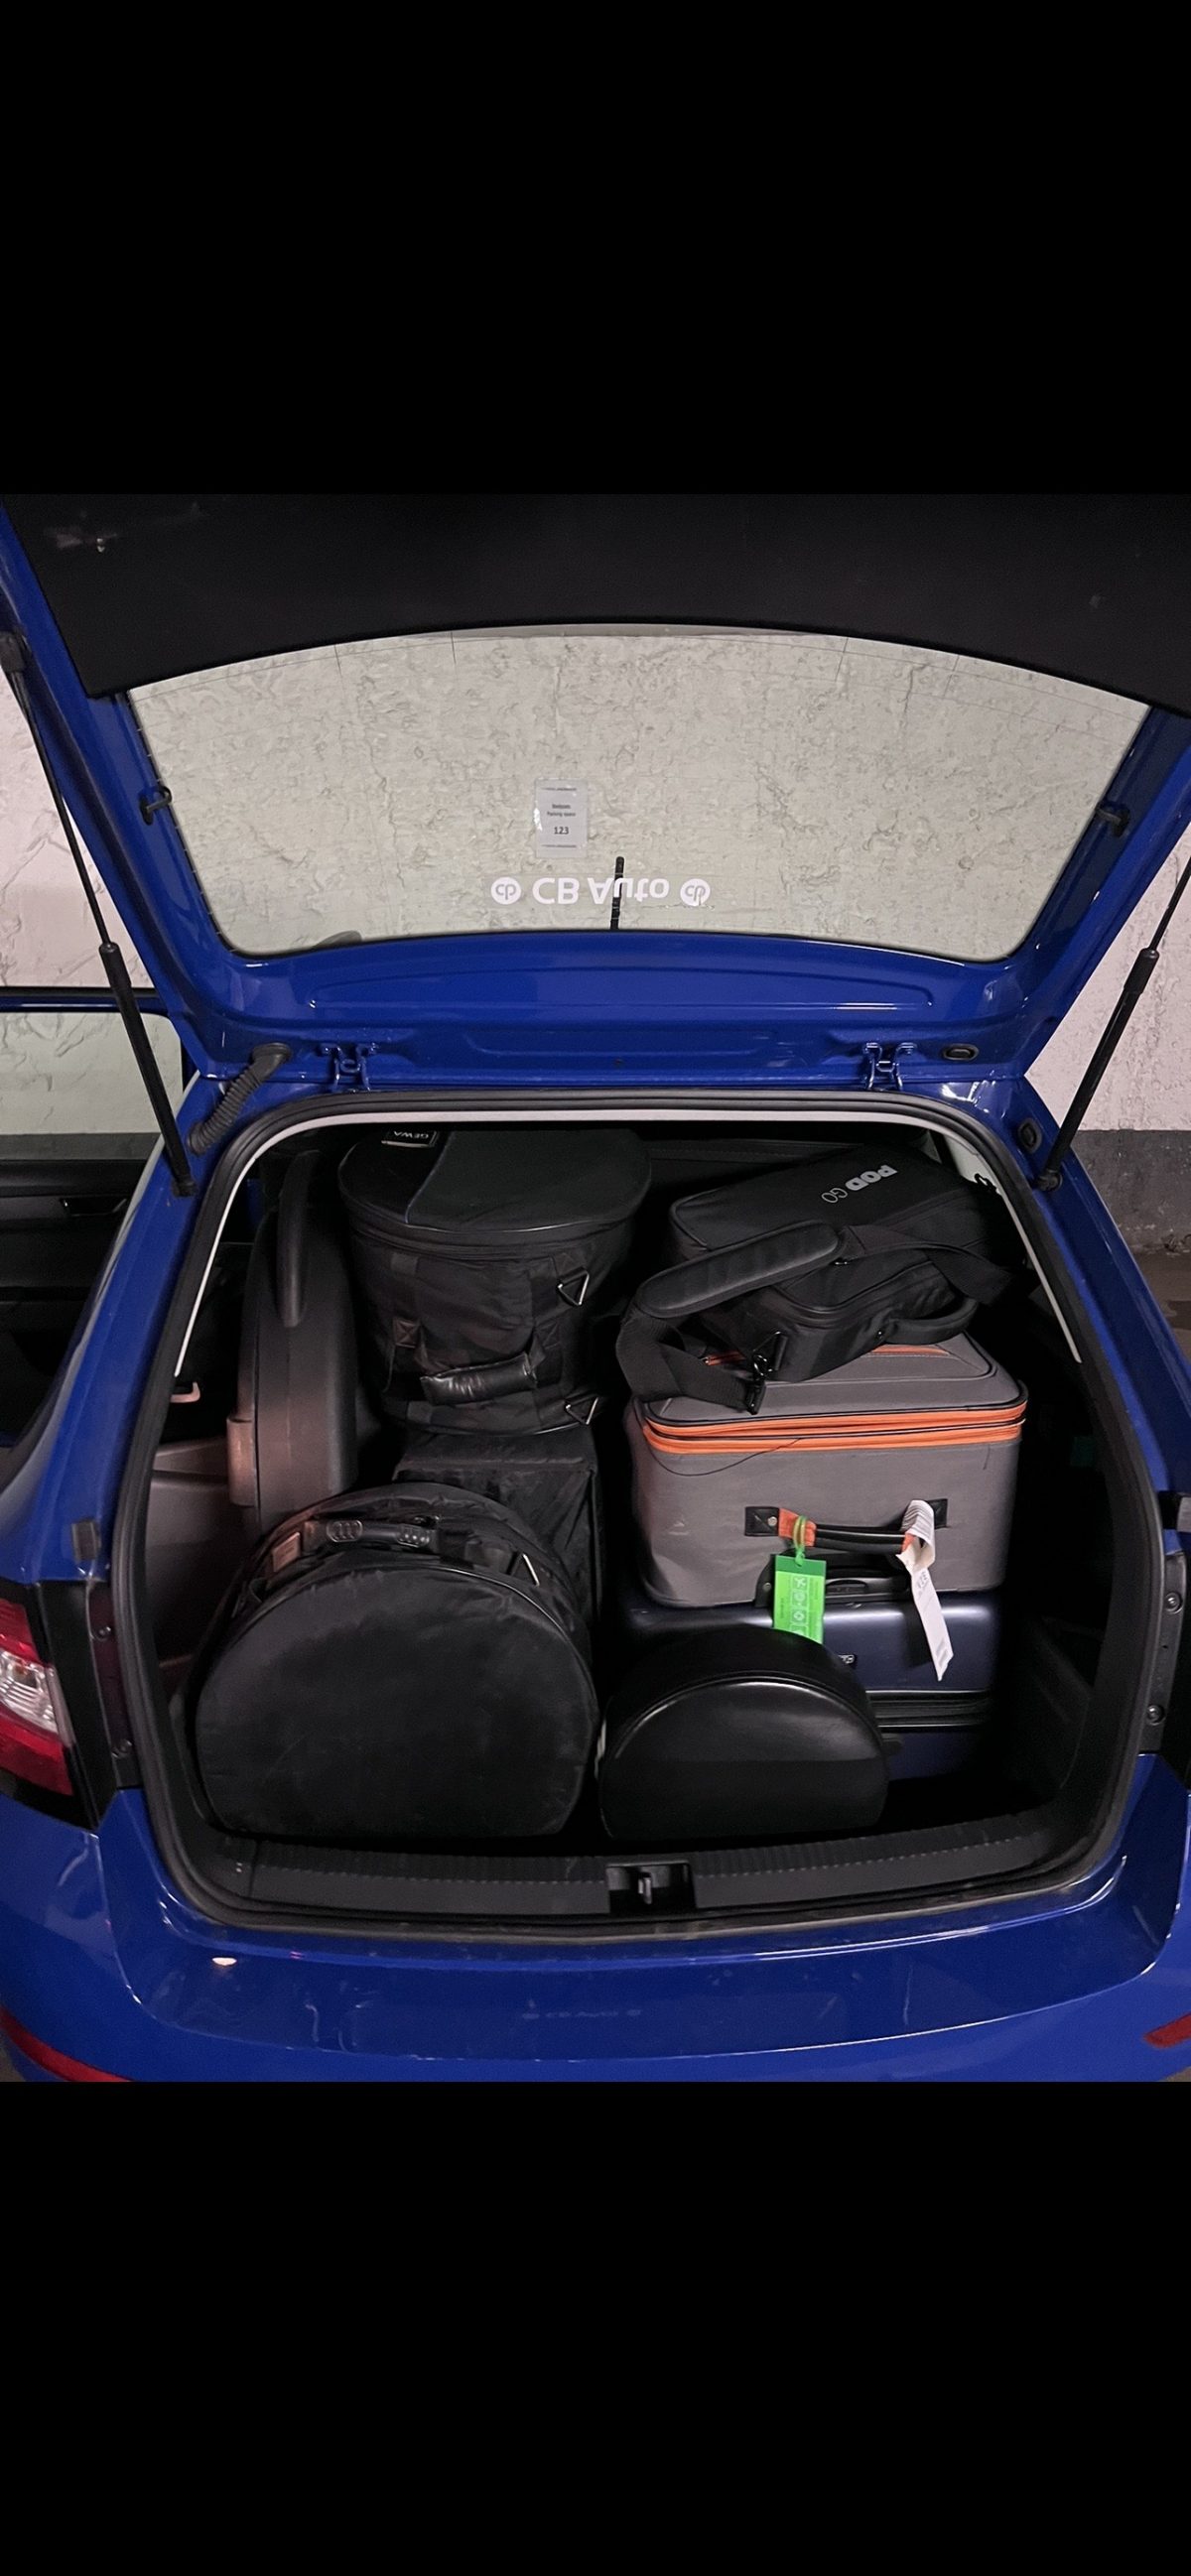 Gear packed into the trunk